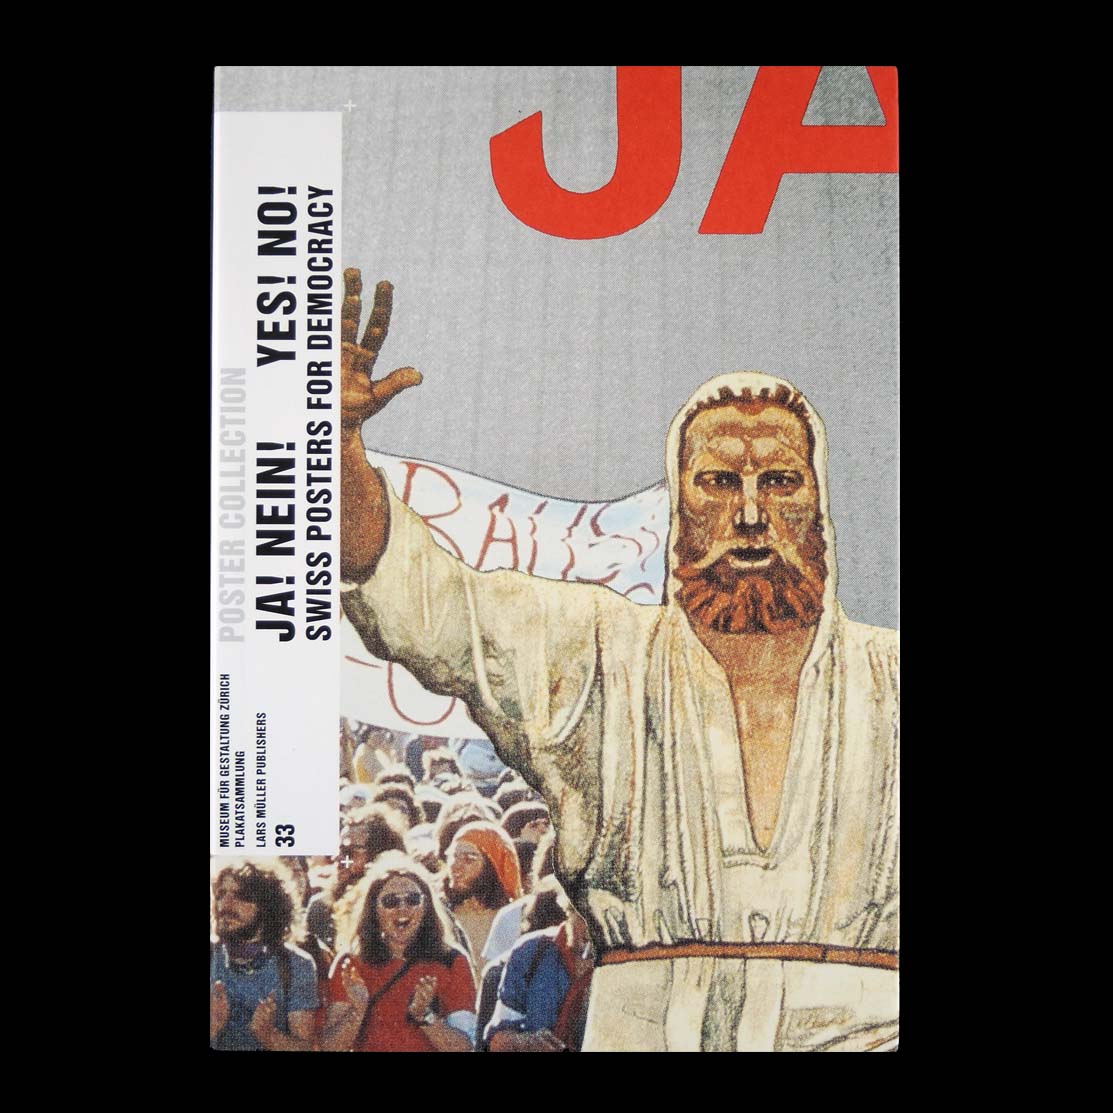 Poster Collection 33: Ja! Nein! Yes! No! Swiss Posters for Democracy